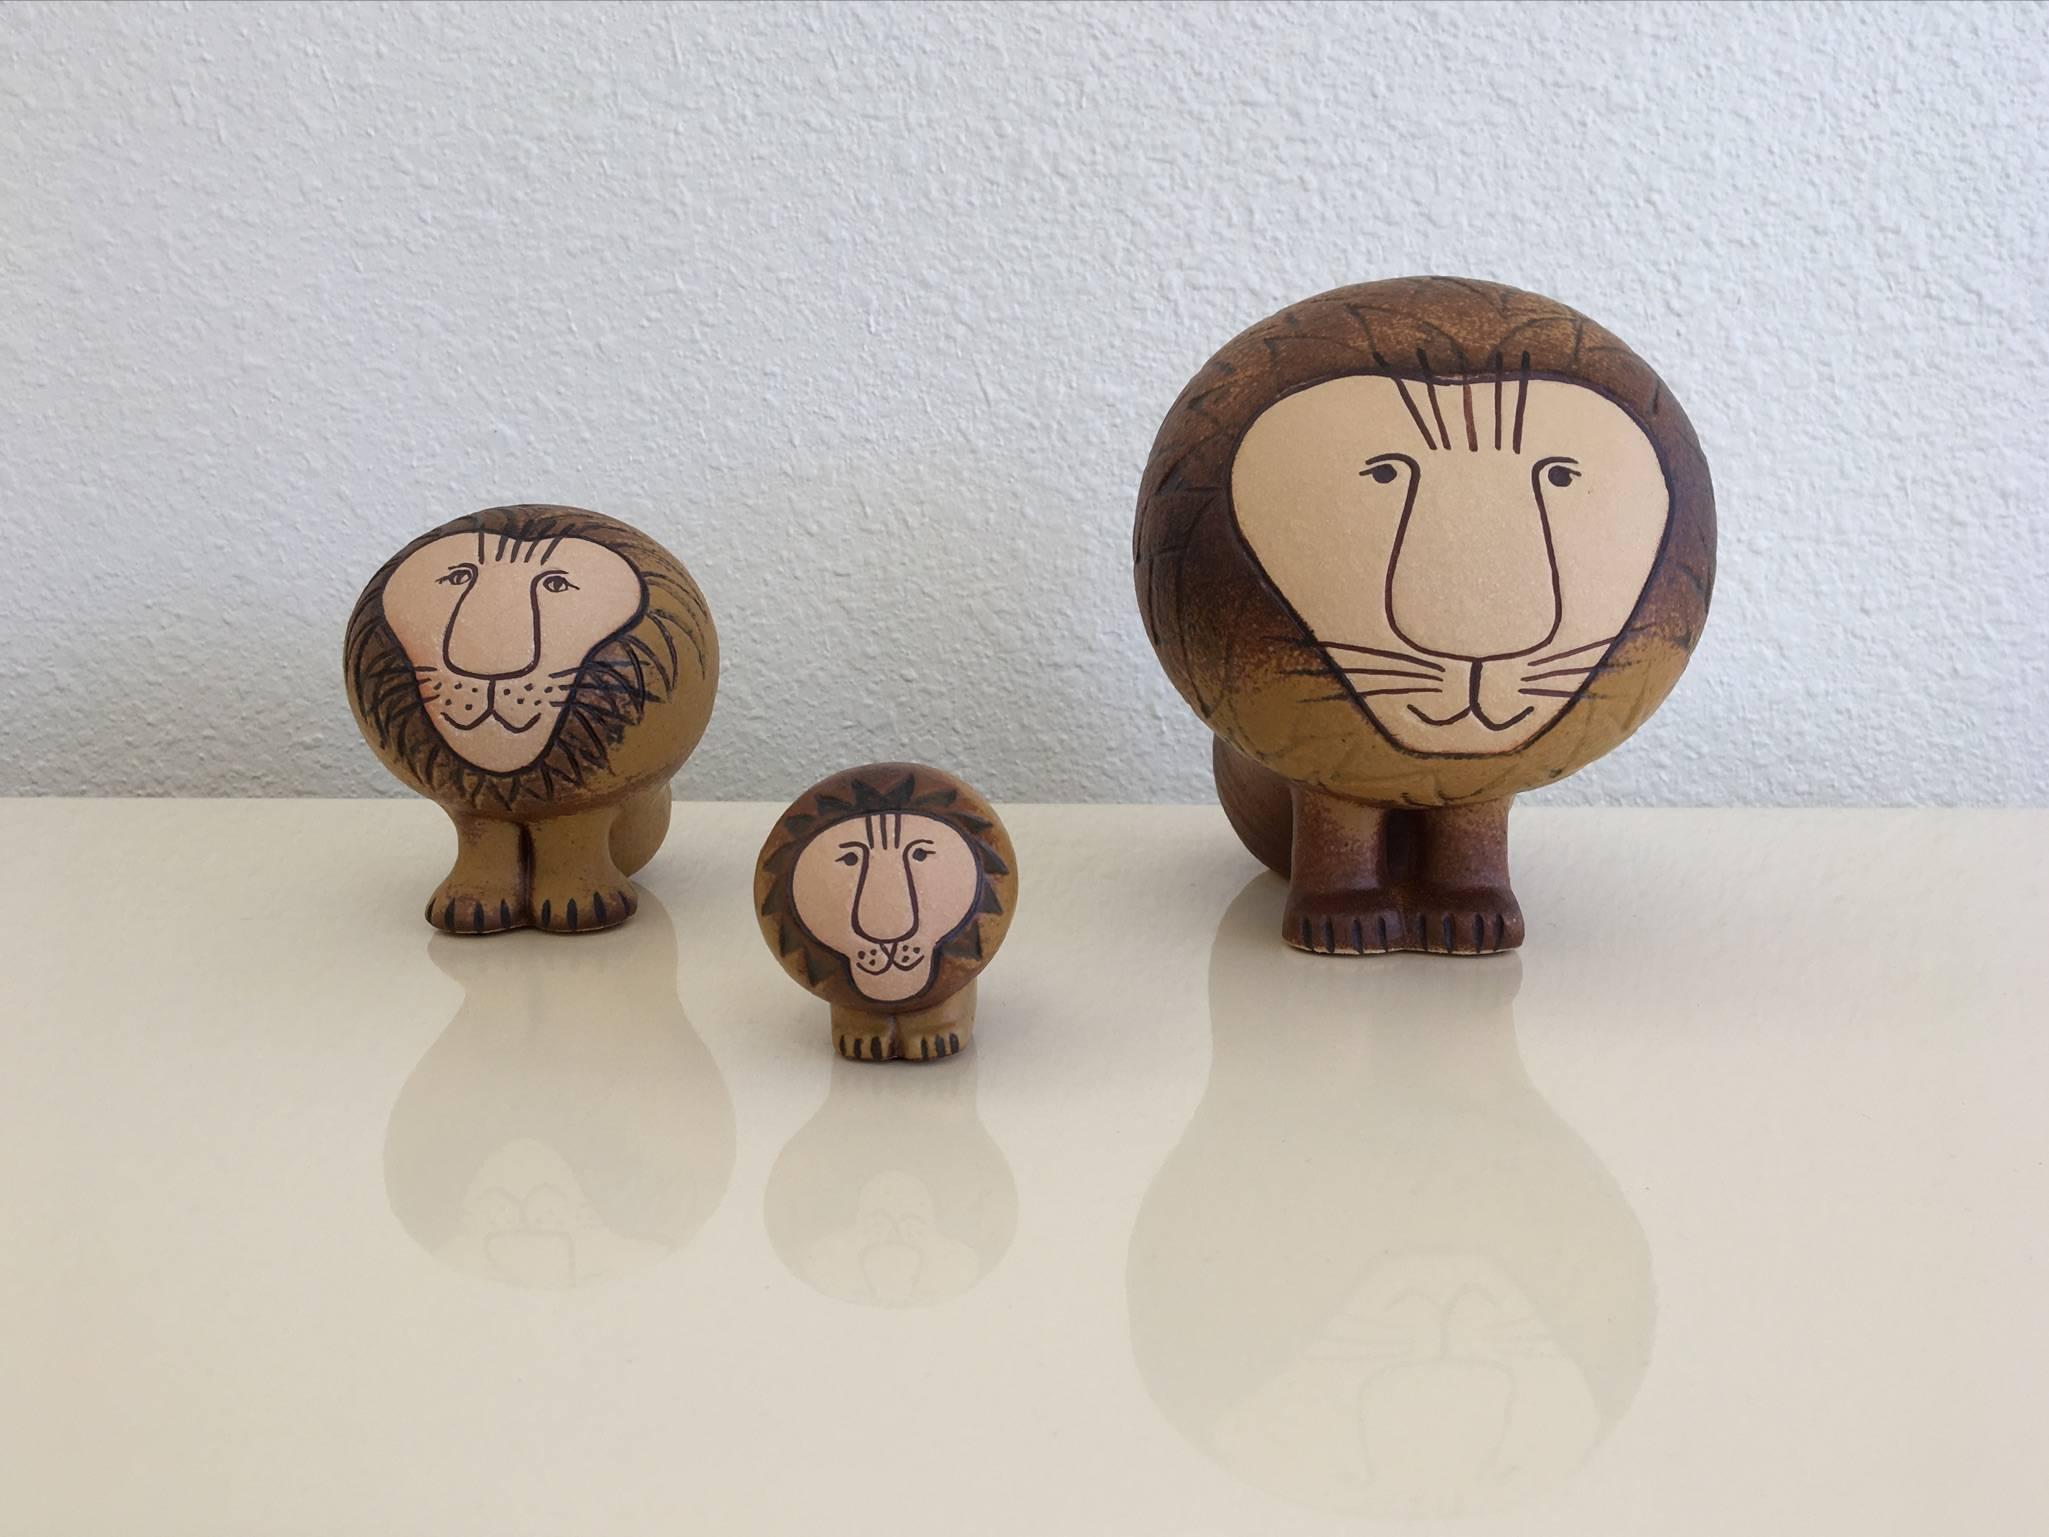 A set of three Swedish Ceramic glazed Lions by Lisa Larson for Gustavsberg.
This are from her 